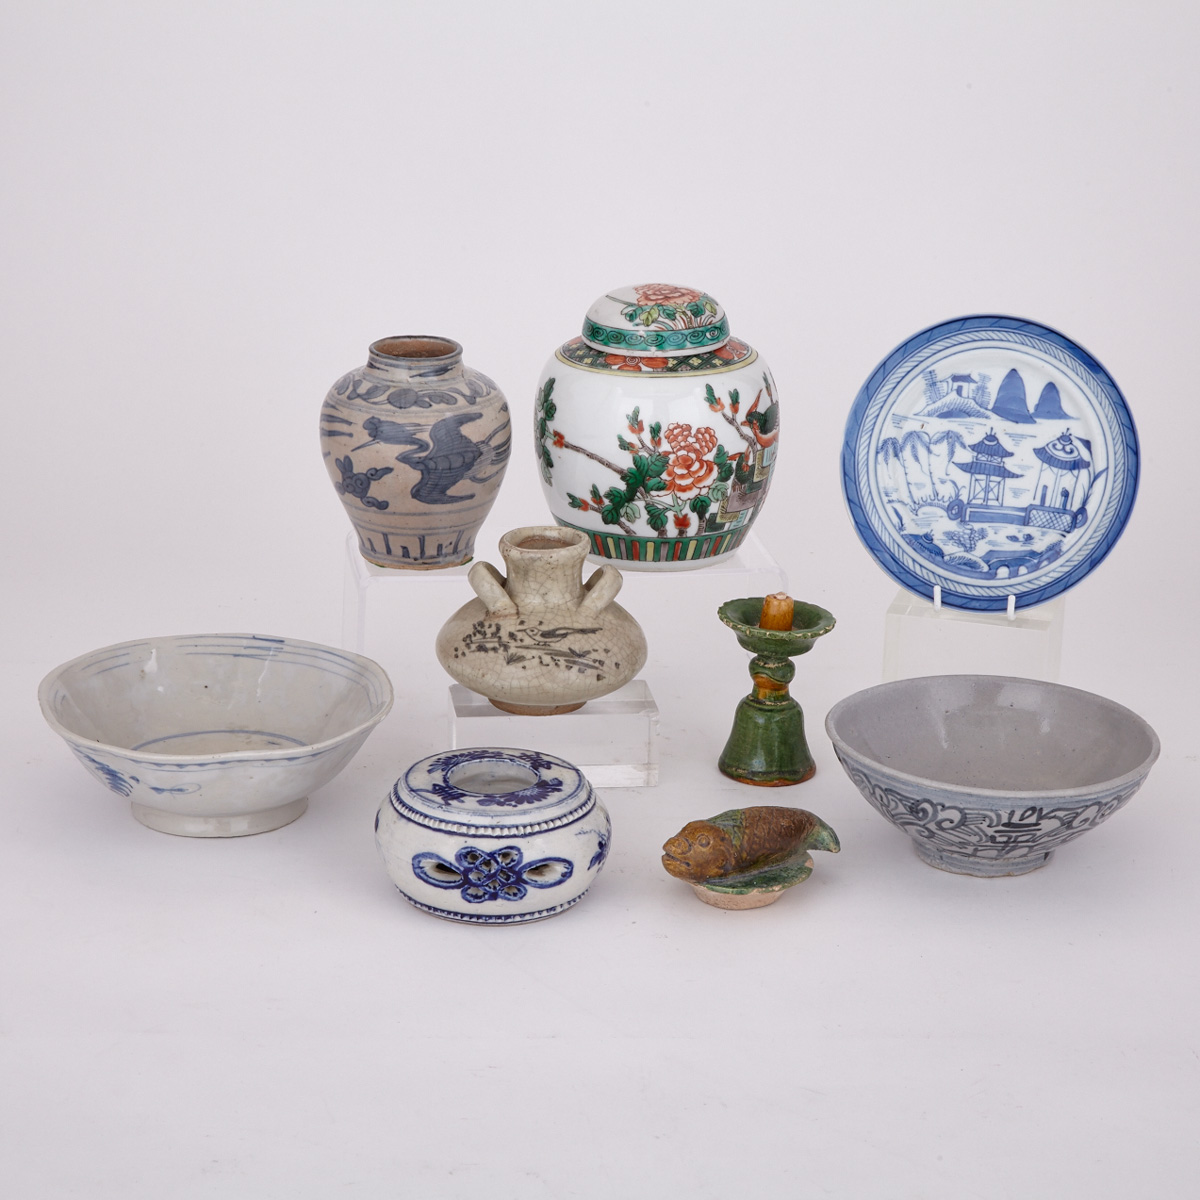 Group of Nine Asian Wares, China and Thailand